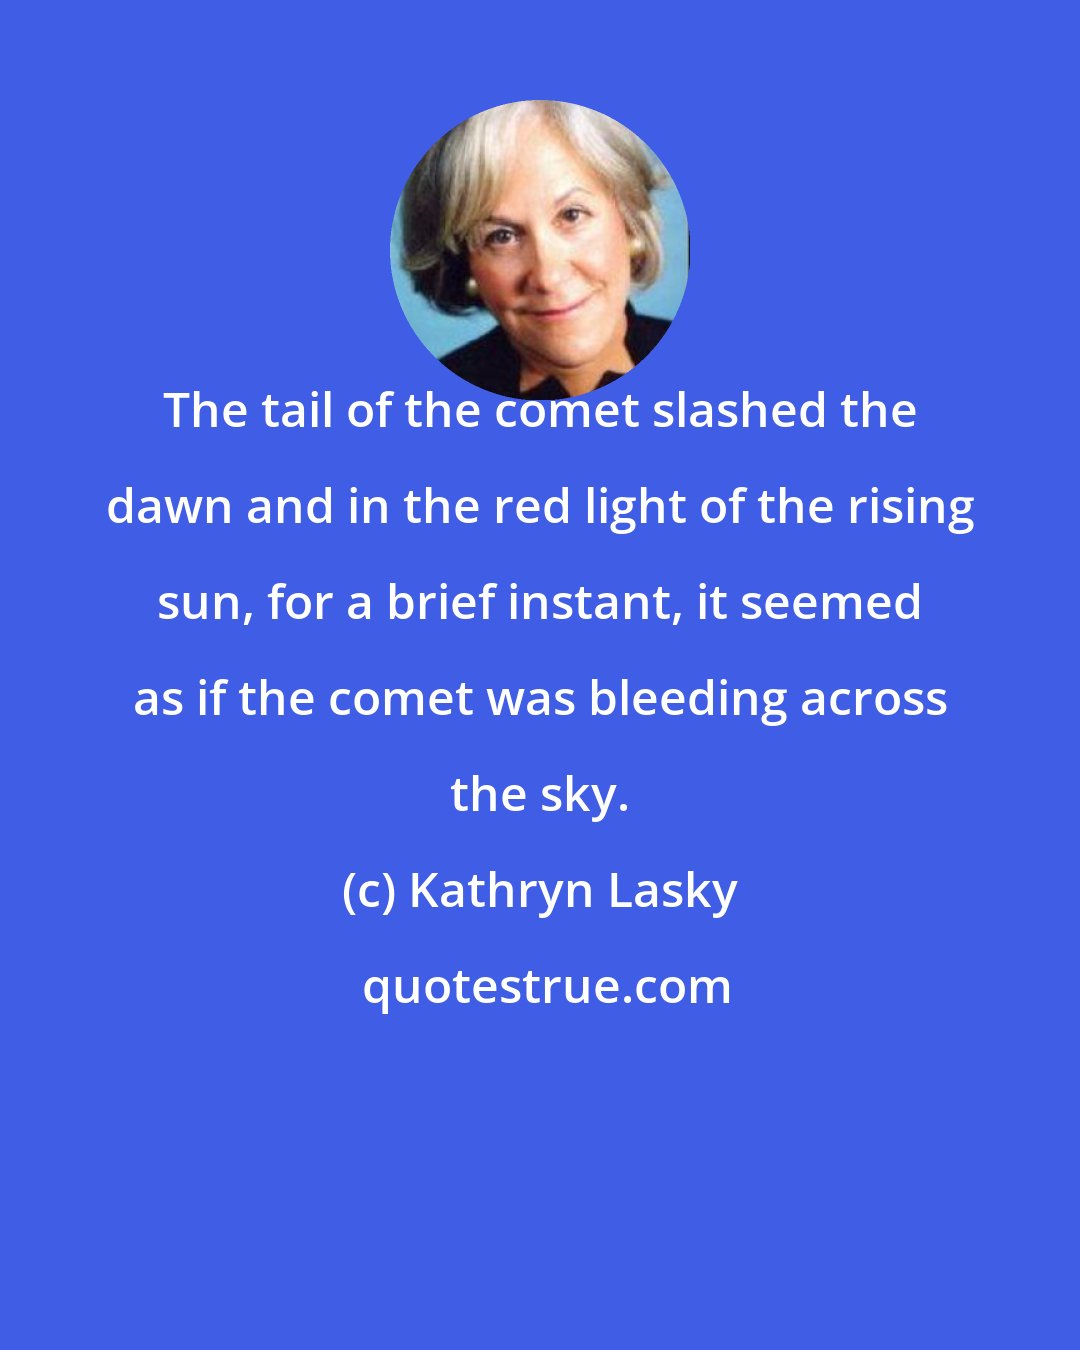 Kathryn Lasky: The tail of the comet slashed the dawn and in the red light of the rising sun, for a brief instant, it seemed as if the comet was bleeding across the sky.